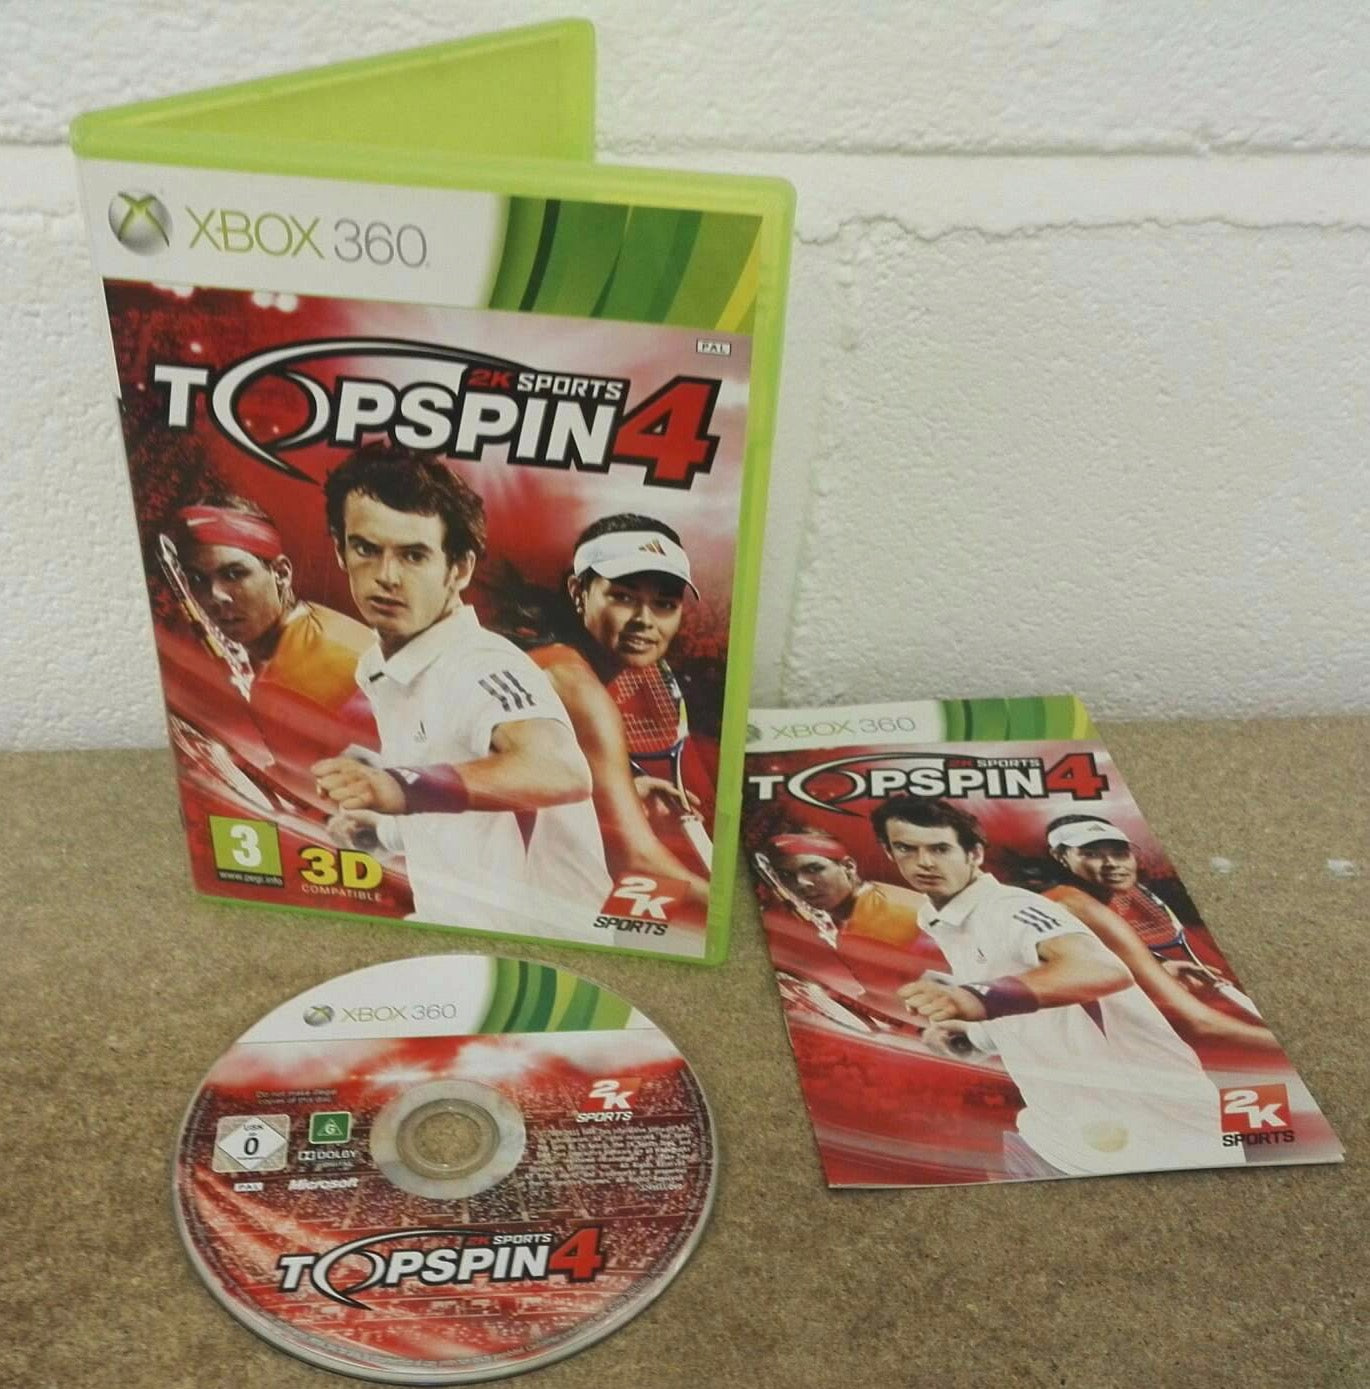 Top Spin 4 Microsoft Xbox 360 Game